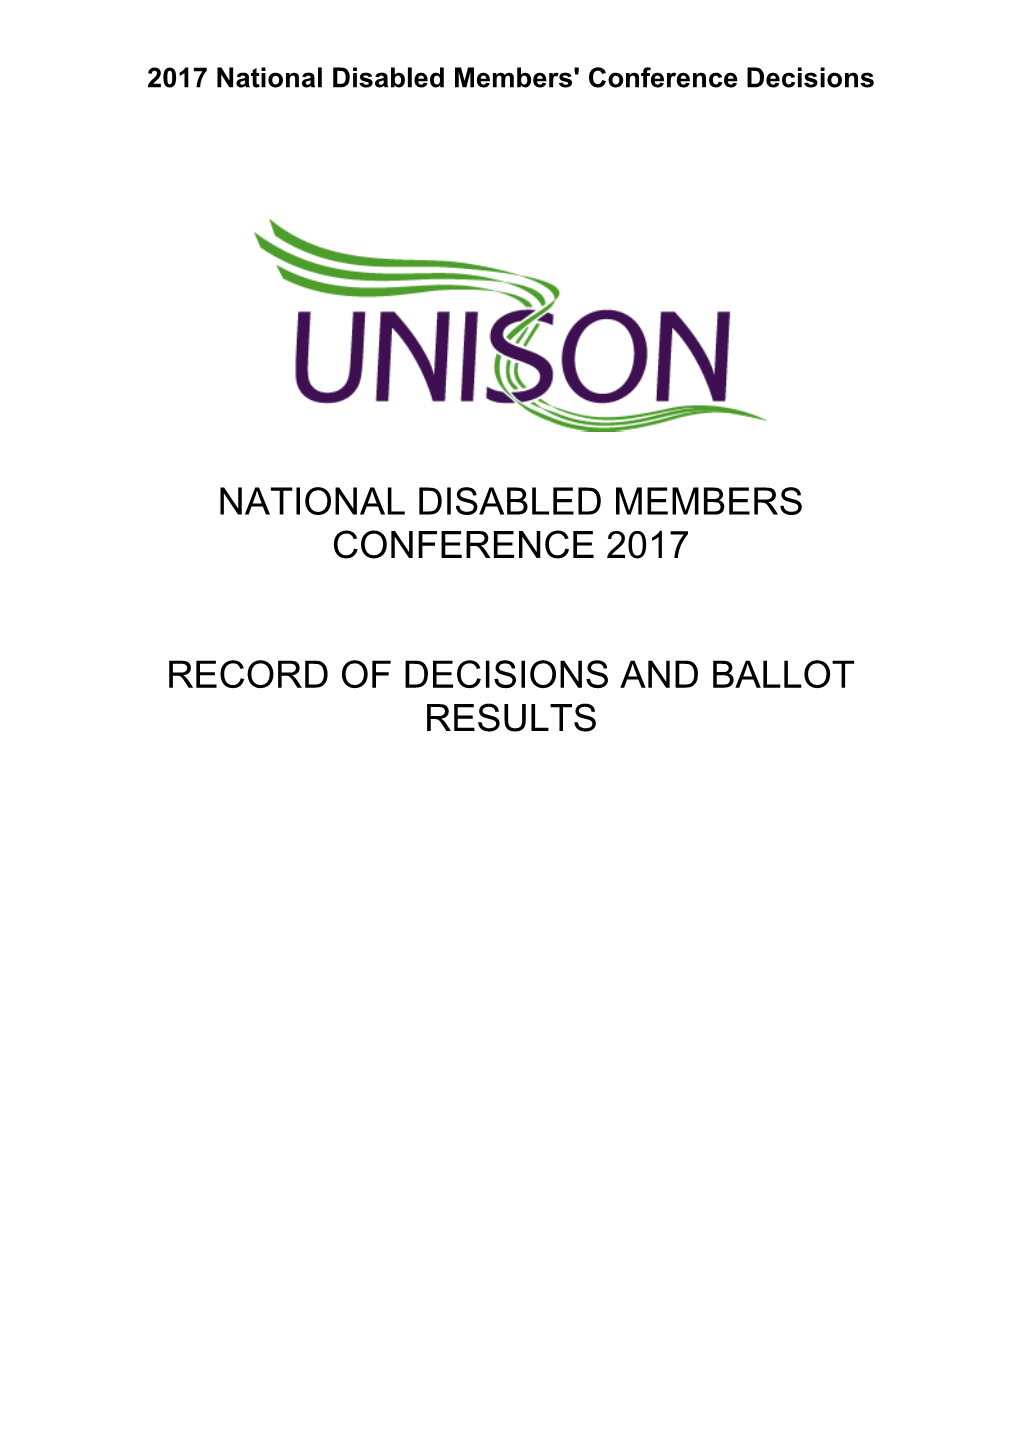 2017 National Disabled Members' Conferencedecisions